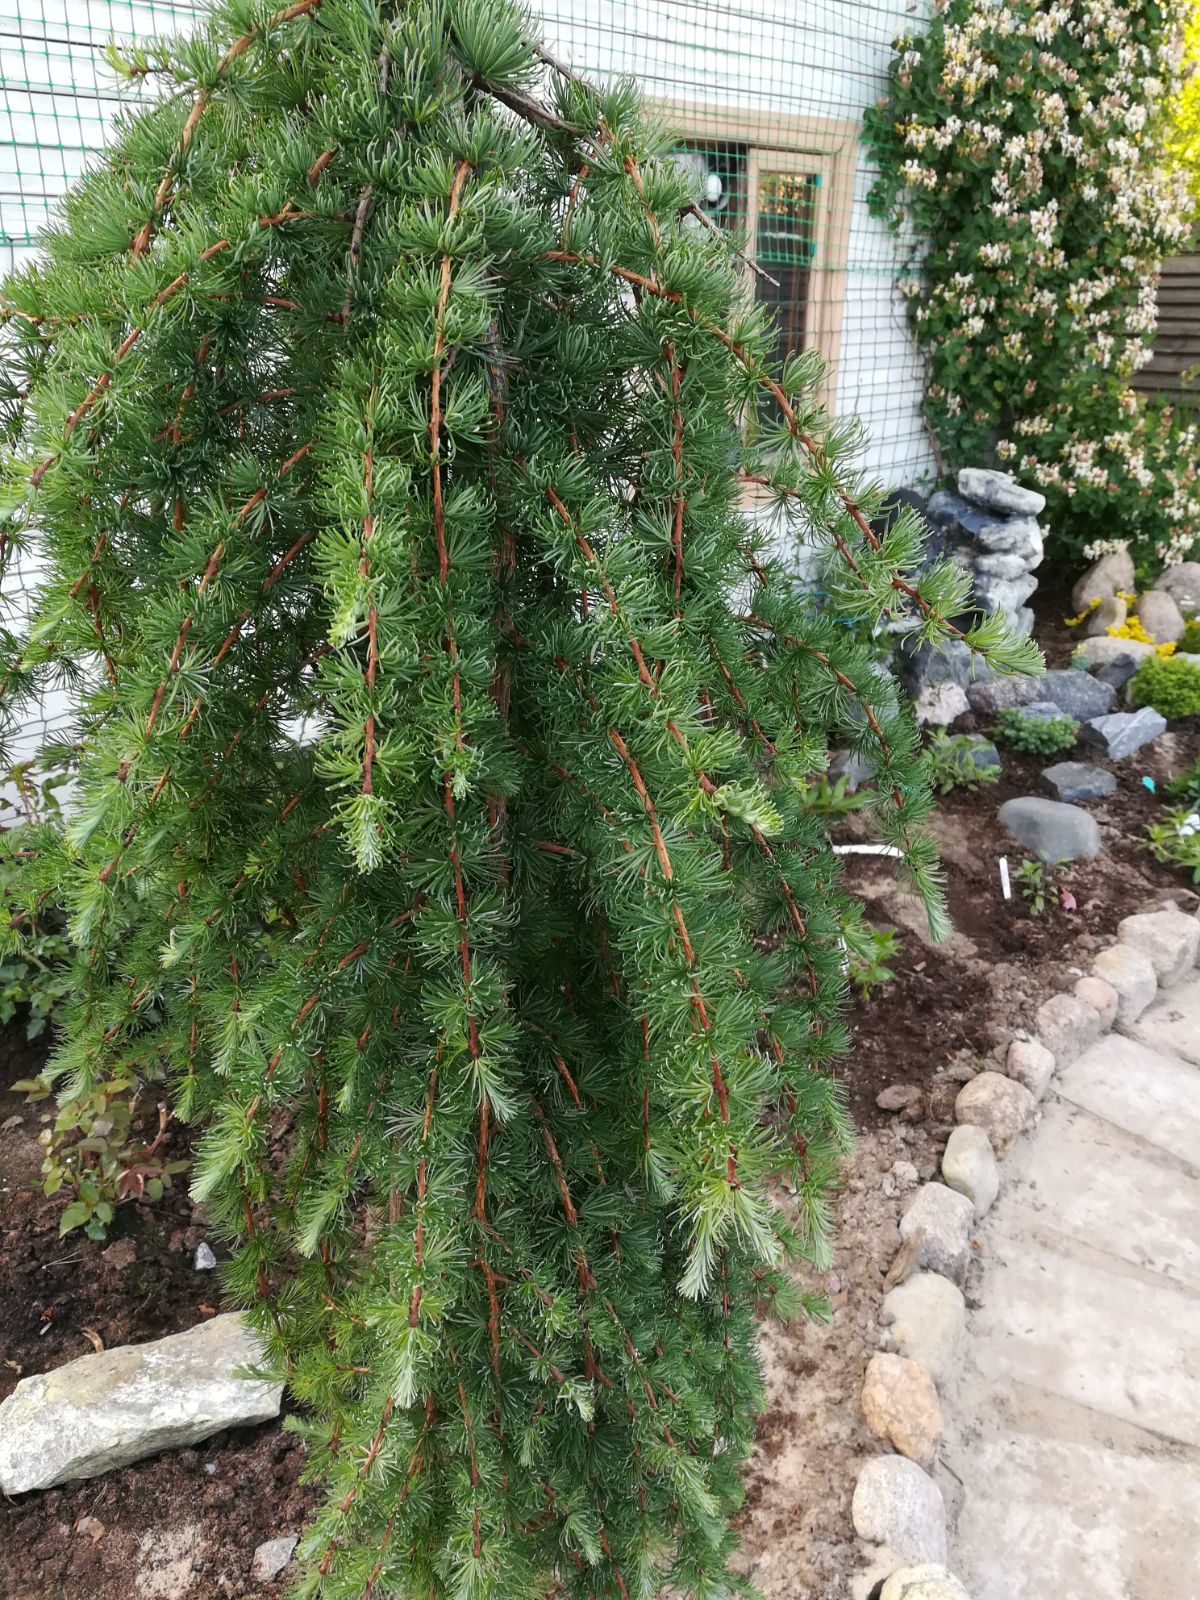 A weeping larch tree in a front yard